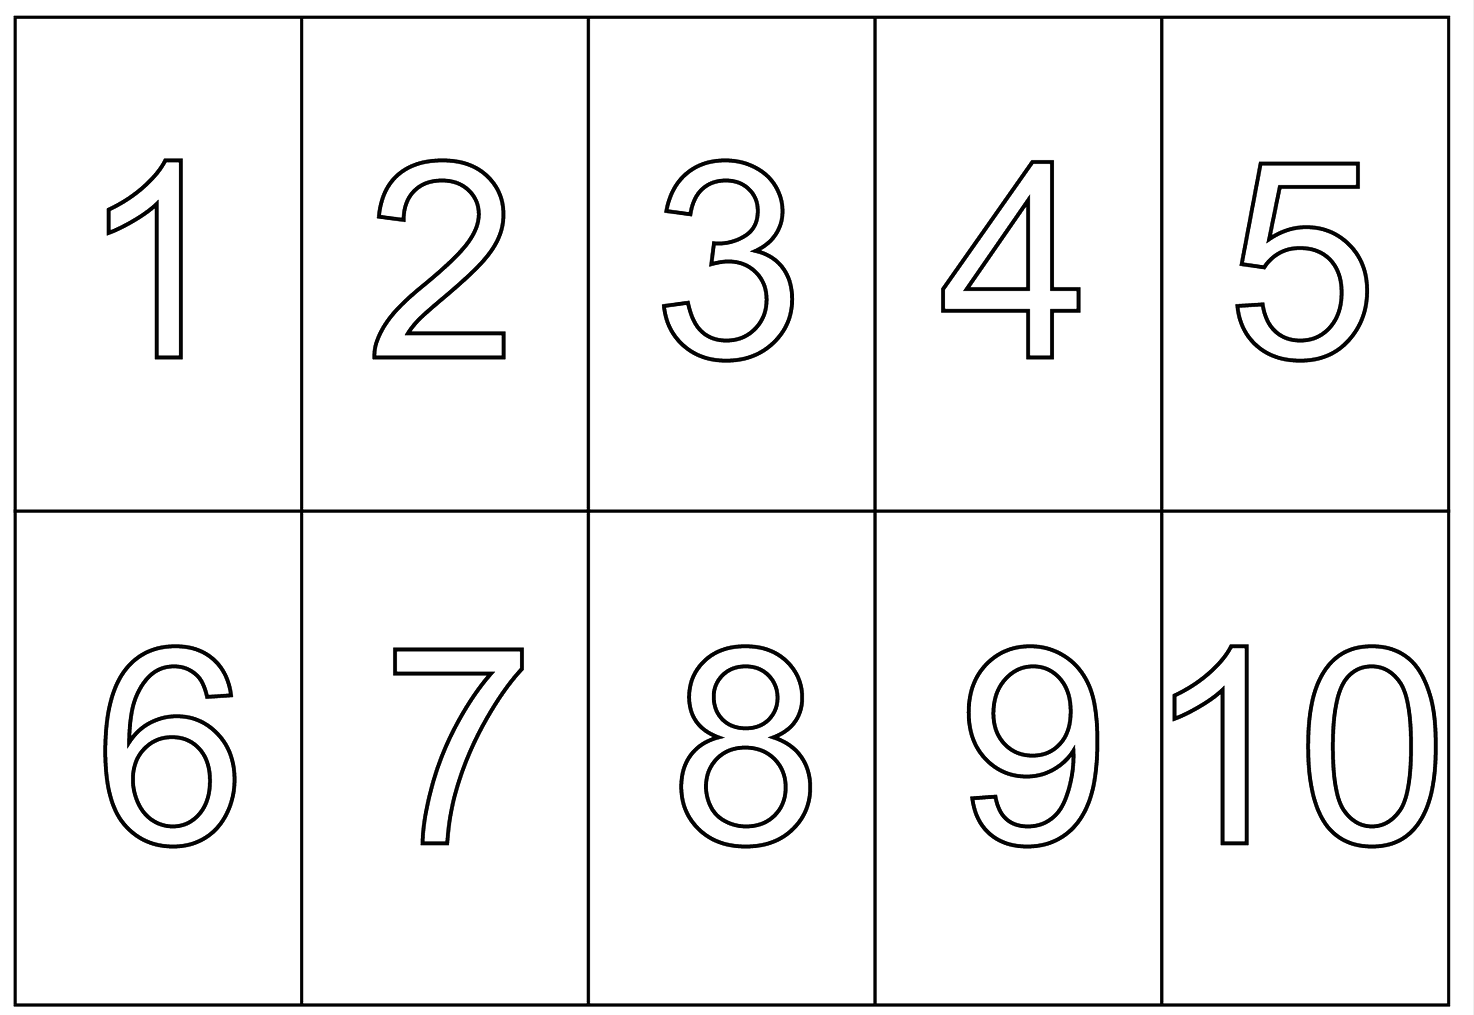 1 to 10 Numbers PNG Transparent Images - PNG All